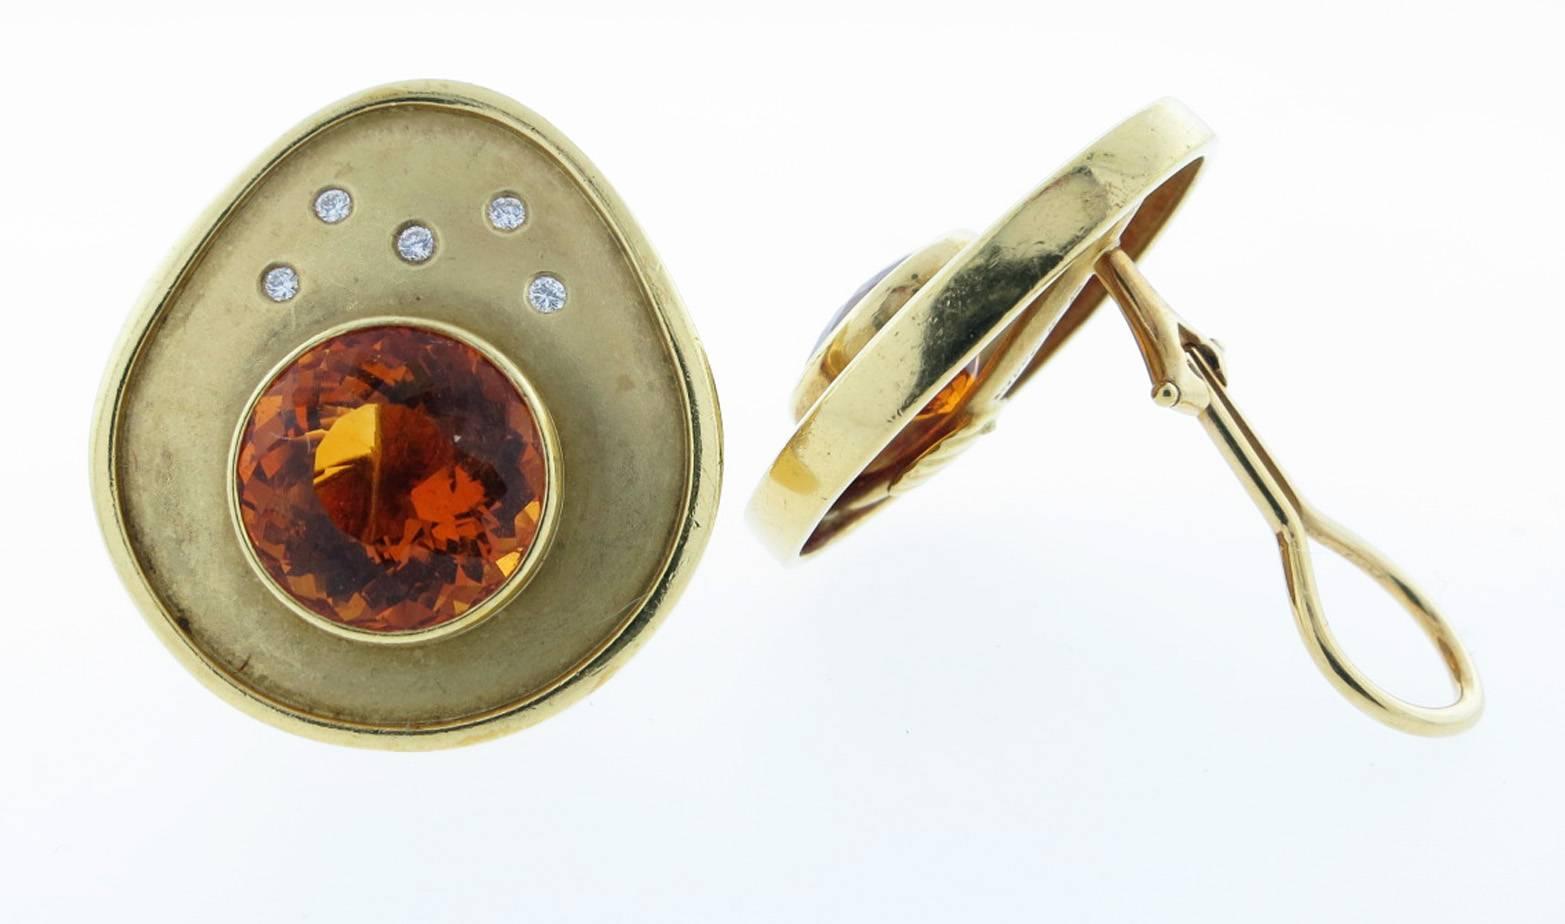 Free form 18kt. yellow gold,  two finish earrings made by Susan Sadler. Each earring measures approx. one inch and is bezel set with a faceted golden citrine weighing approx. 5.0 cts and five round brilliant cut diamonds. Clip back and posts can be